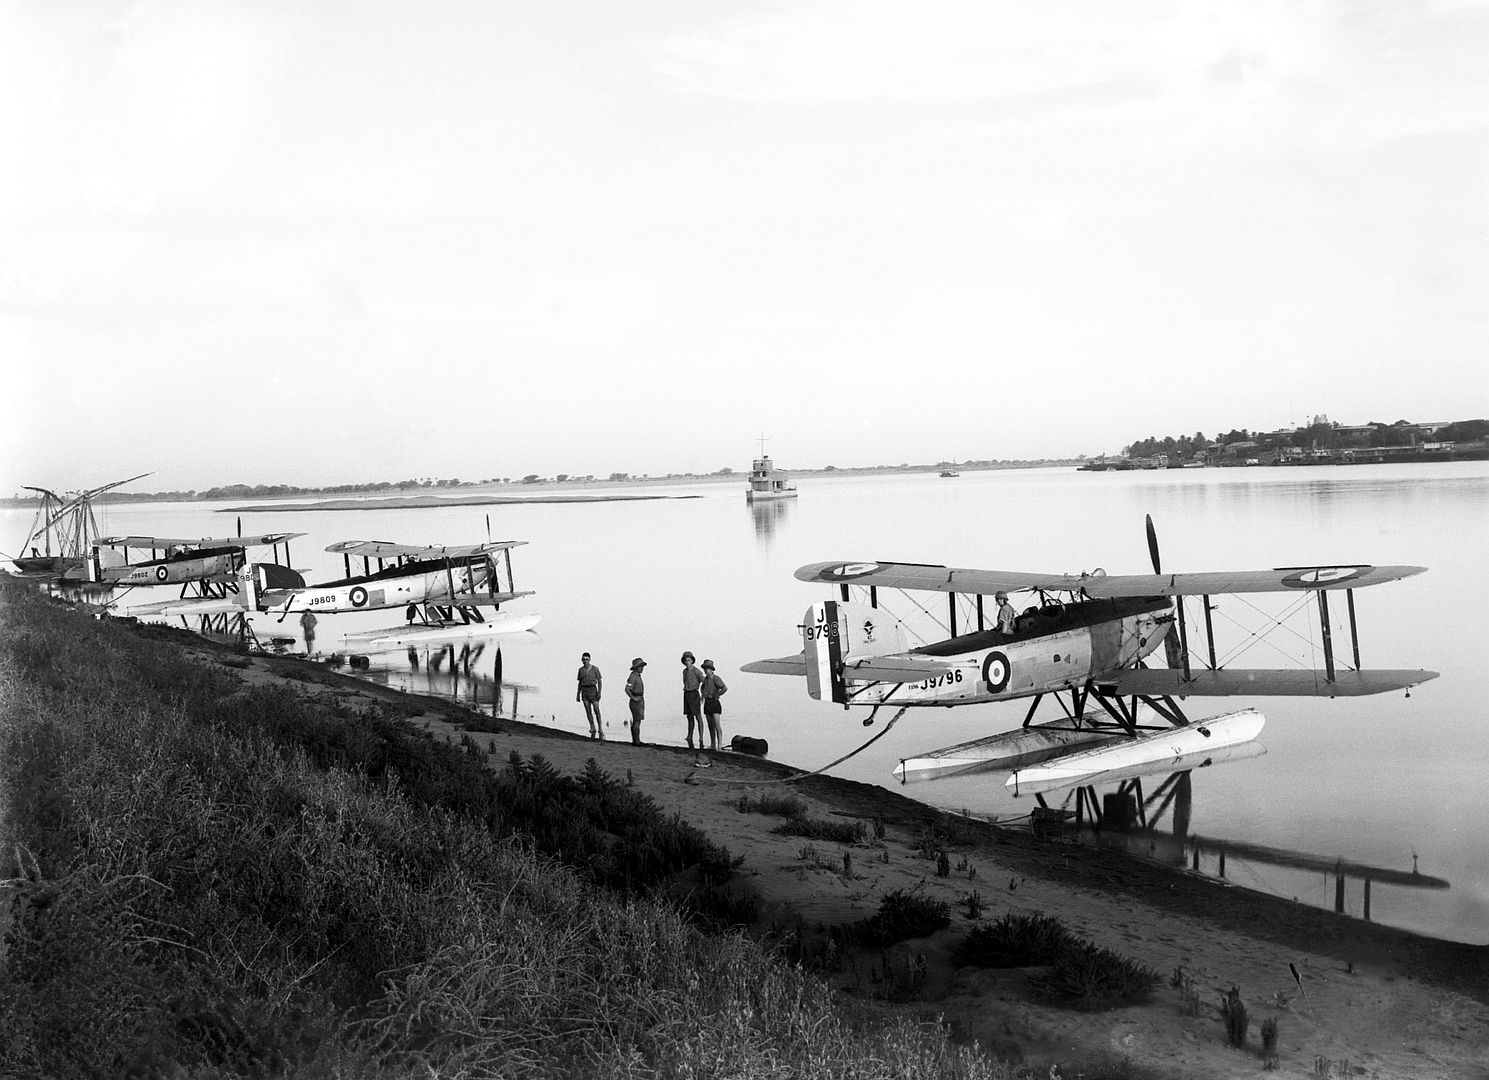 S Of 47 Squadron On The Blue Nile At Khartoum In 1930